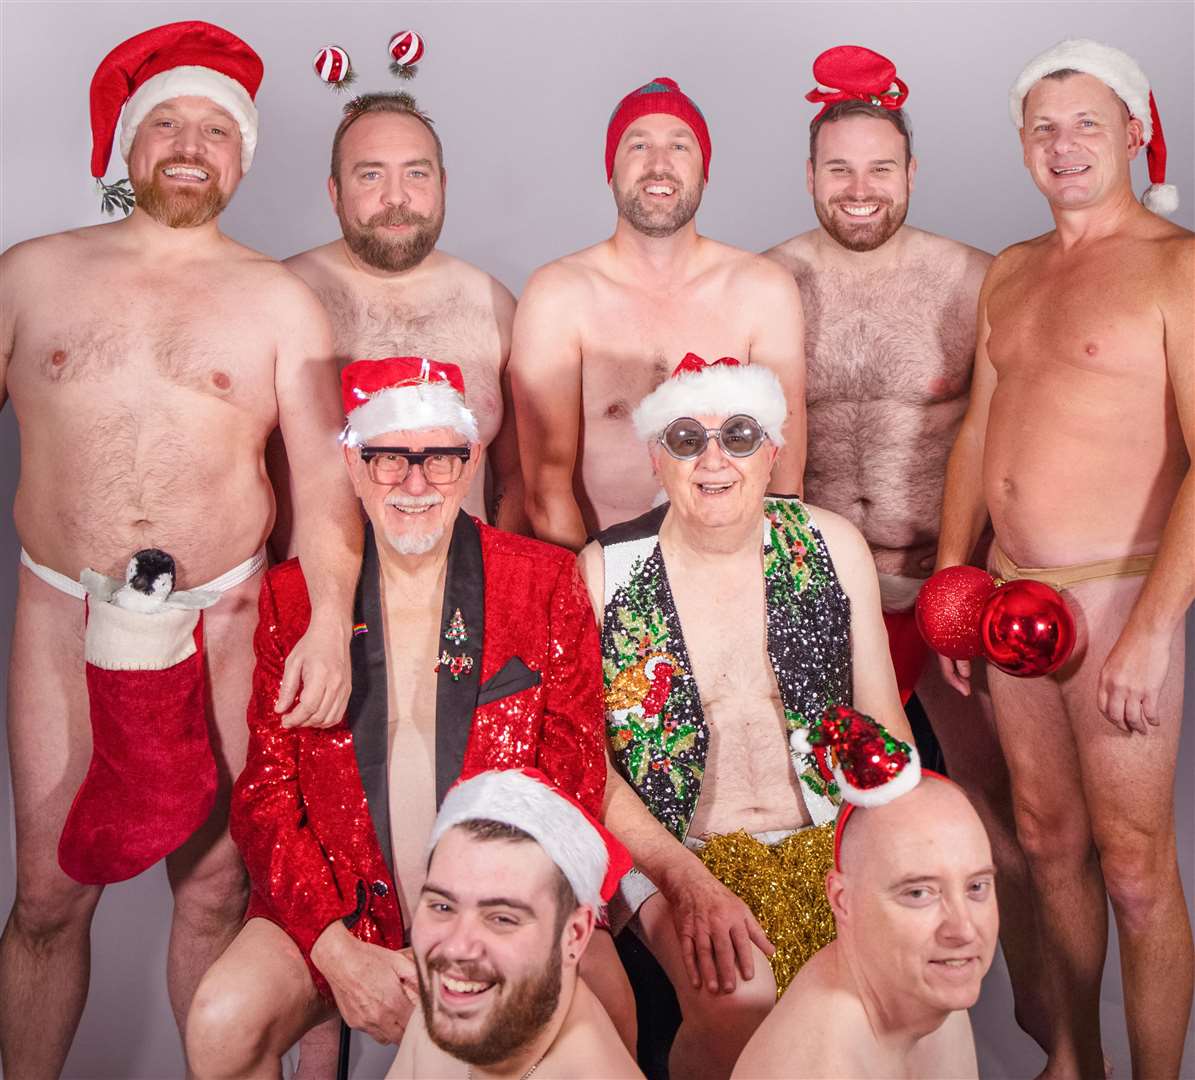 Male cast members bare all for the picture for December. Photo: Sarah Relf/Lawless Rose Photography